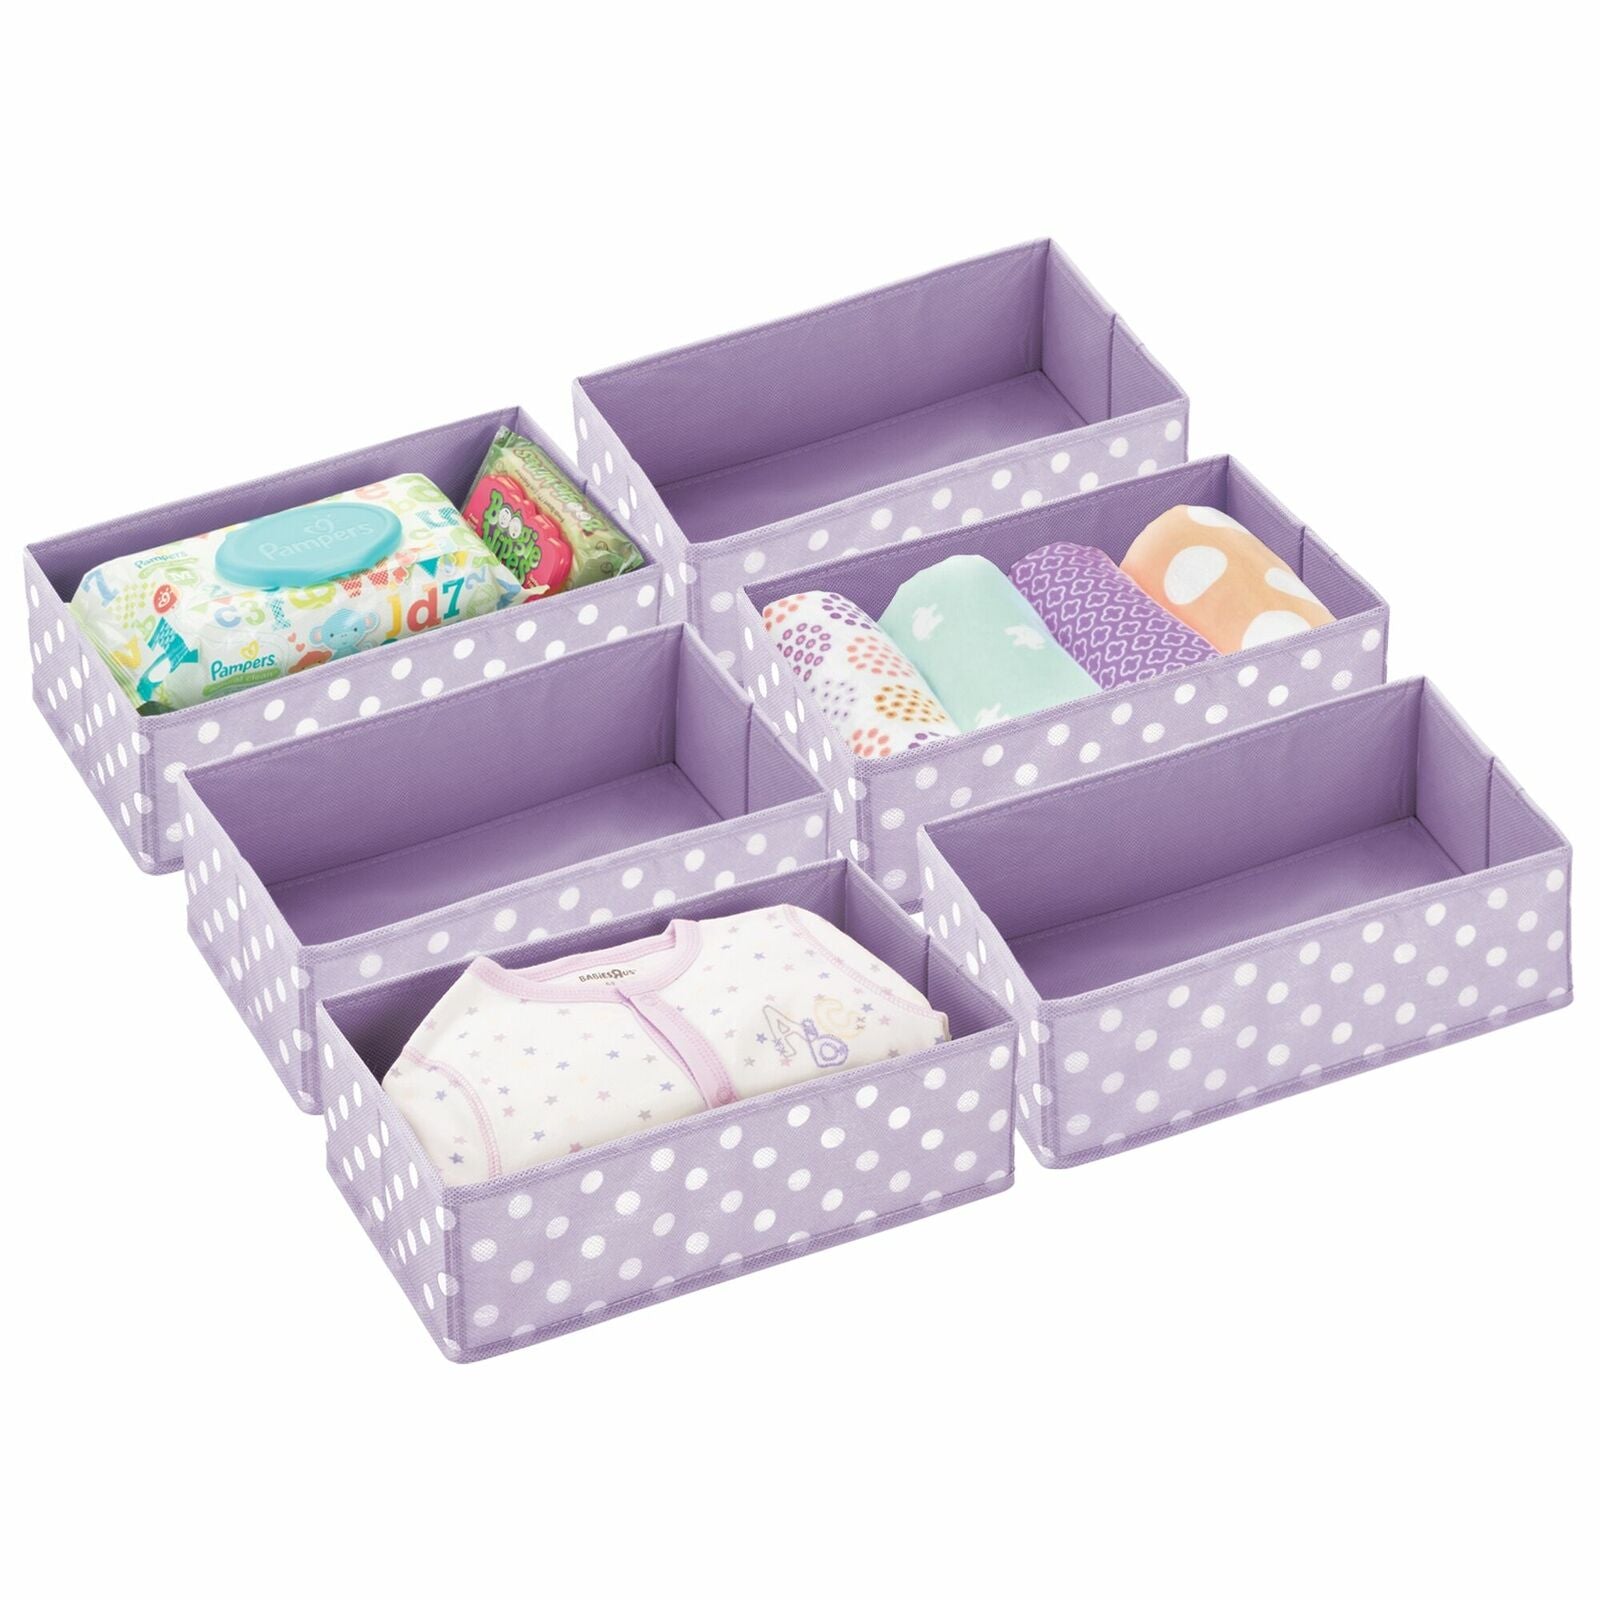 Blushbees Storage Baskets with Metal Frame for Organizing Wardrobe